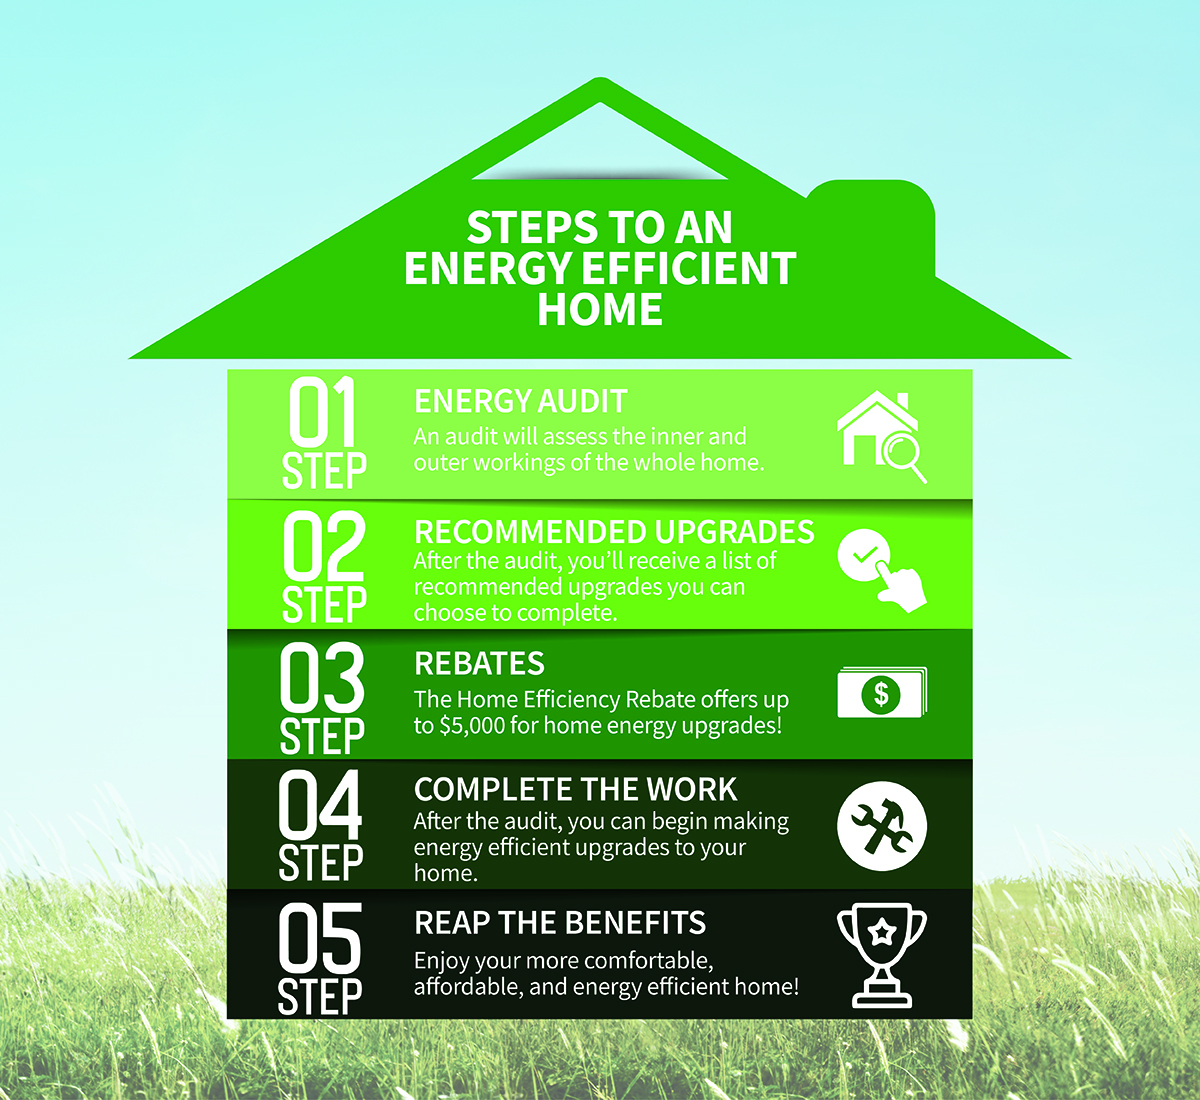 Improve Old Home Energy Efficiency With HER Incentive BSG